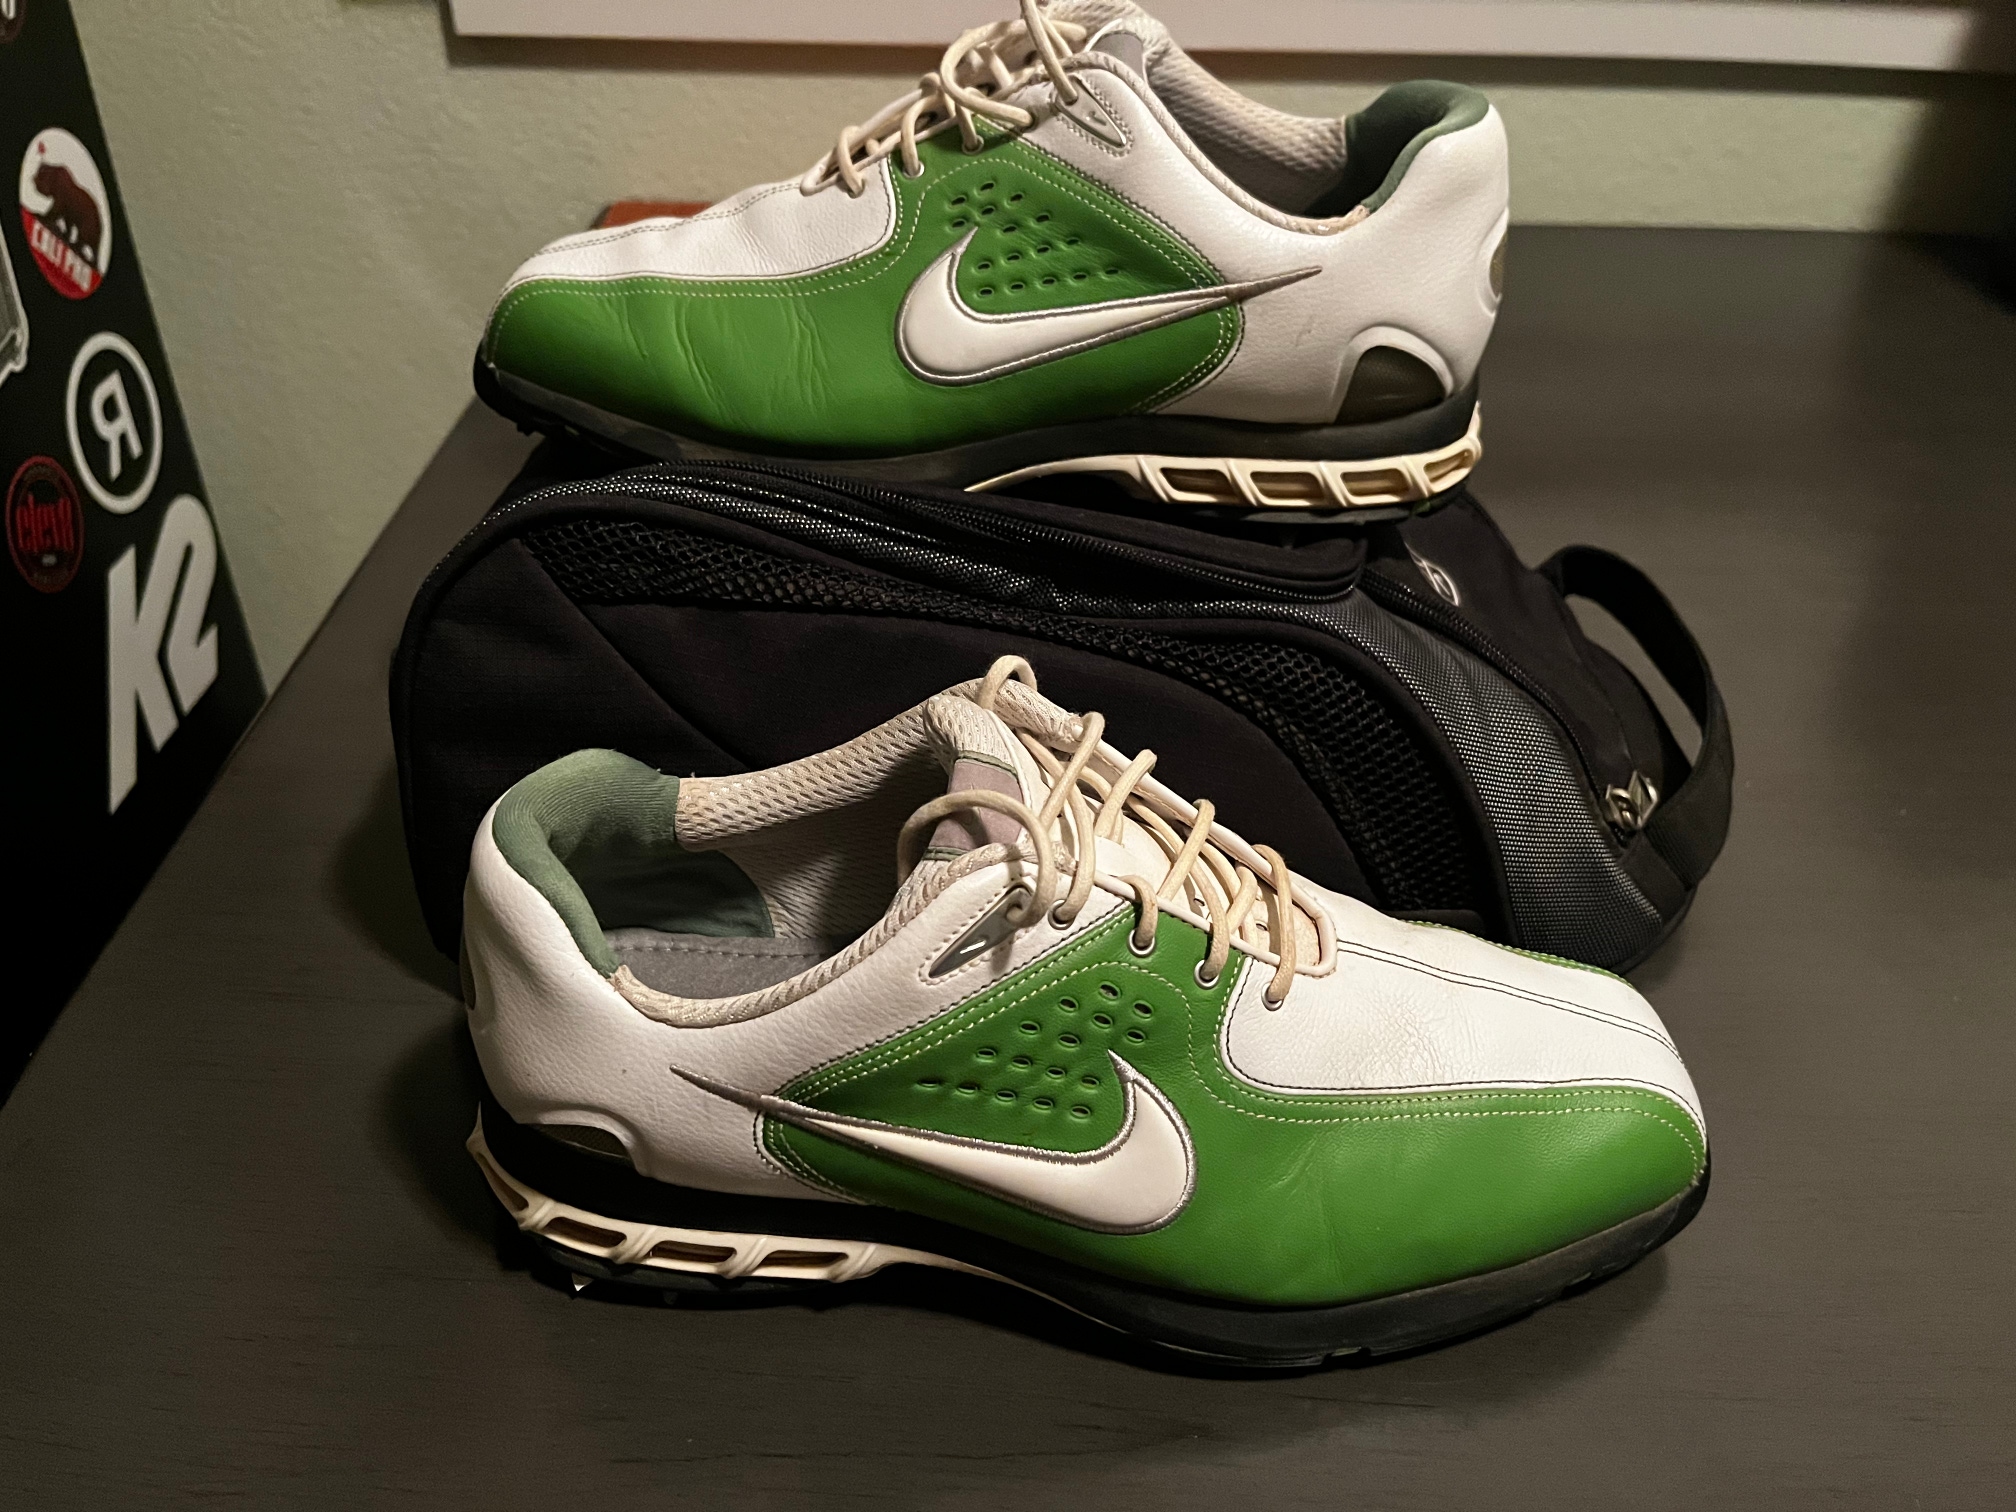 Men's Used Size 9.0 (Women's 10) Nike Golf Shoes